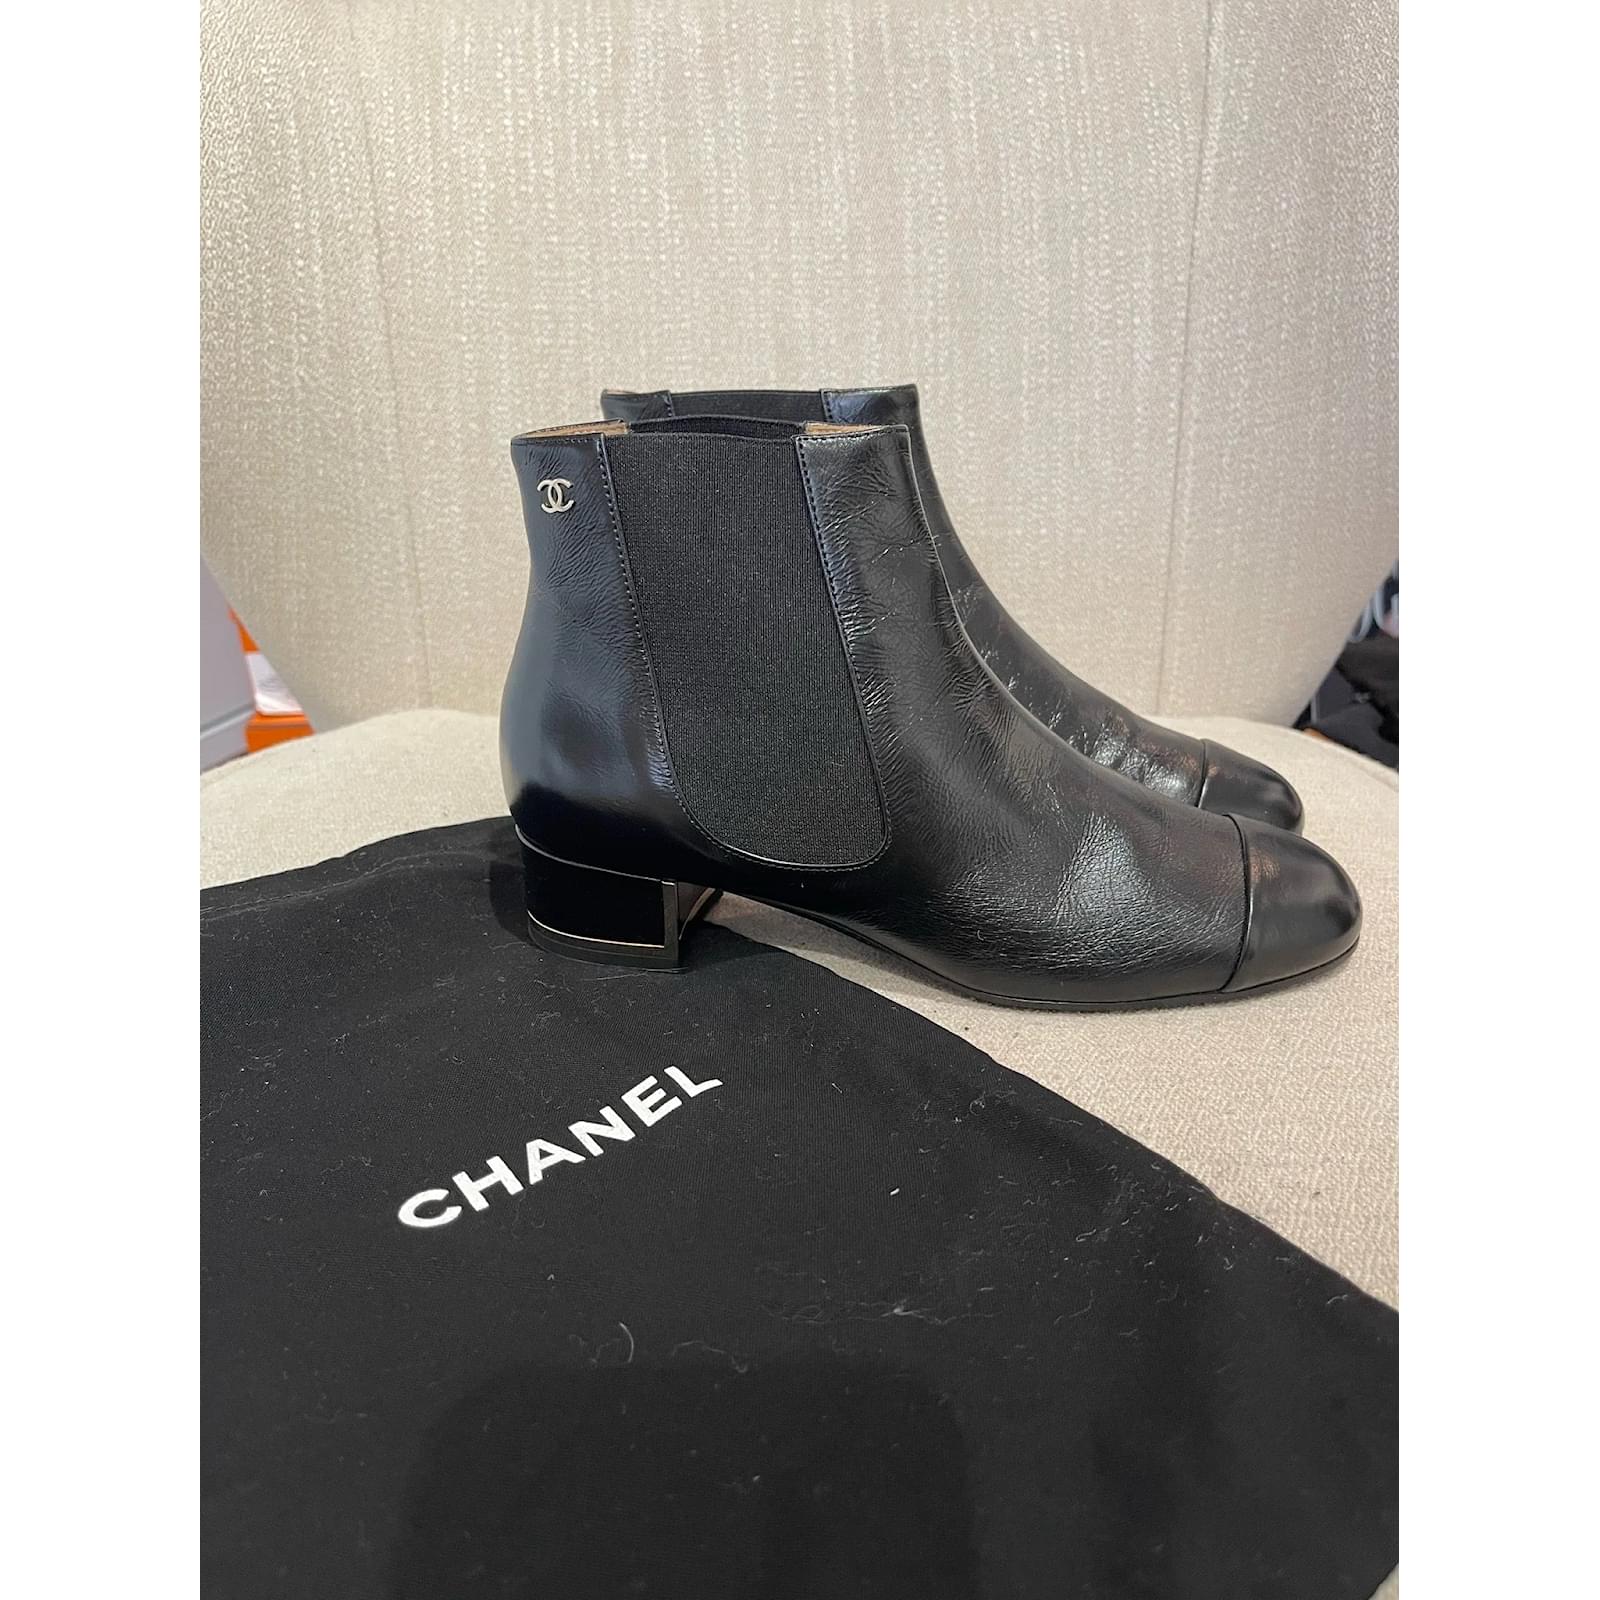 Chanel Black Calfskin Leather Turnlock Cc Ankle Boots Booties